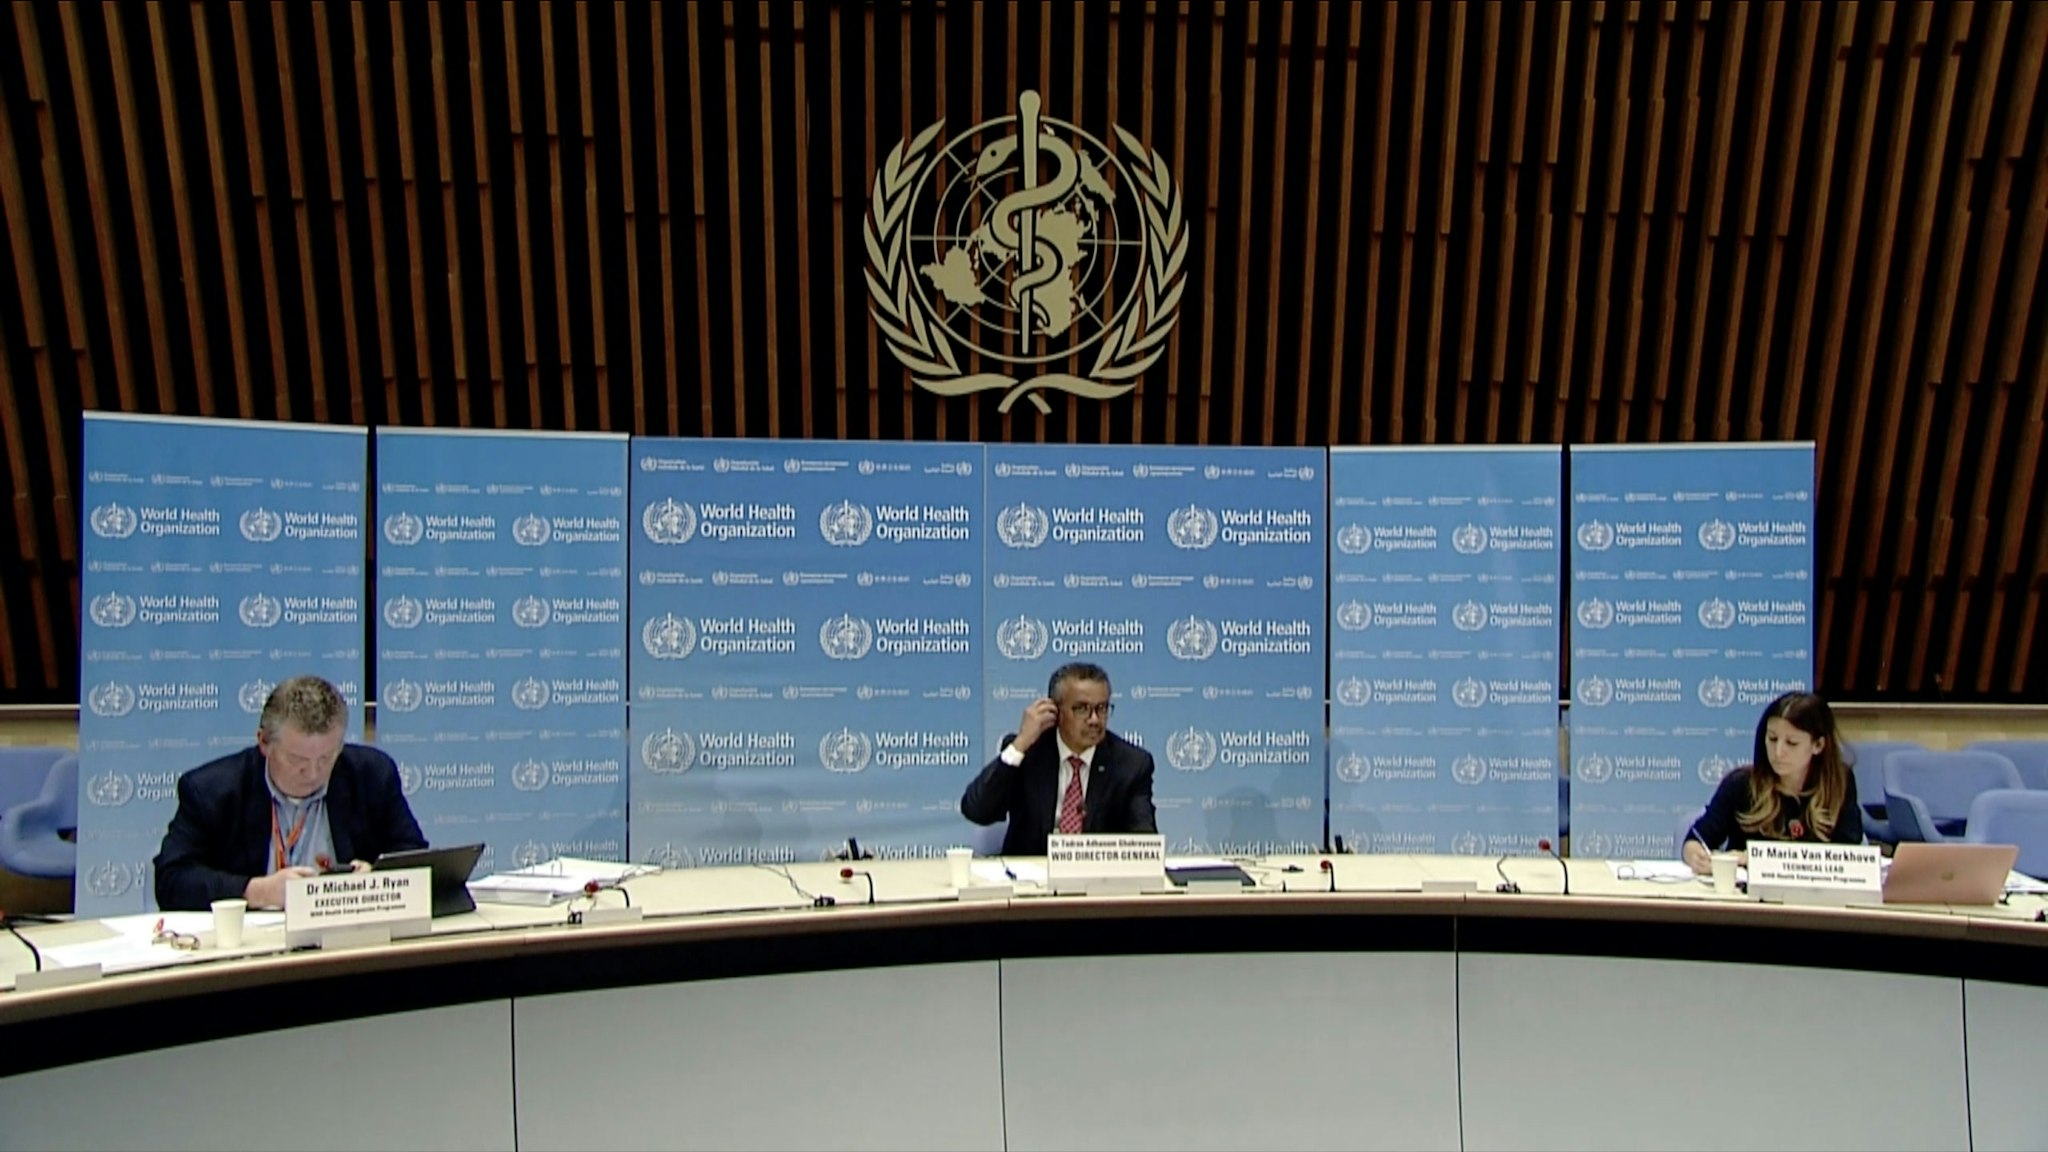 A TV grab from the World Health Organization (WHO) website shows (From L) World Health Organization (WHO) Health Emergencies Programme Director Michael Ryan, WHO Director-General Tedros Adhanom Ghebreyesus and WHO Technical Lead Maria Van Kerkhove attending a WHO virtual news briefing on the COVID-19 (novel coronavirus) from the WHO headquarters, on April 17, 2020 in Geneva. - Lady Gaga will launch a giant online coronavirus awareness concert on April 18 entitled "One World: Together at Home", featuring music icons like Paul McCartney and Stevie Wonder. (Photo by - / AFP) (Photo by -/AFP via Getty Images)